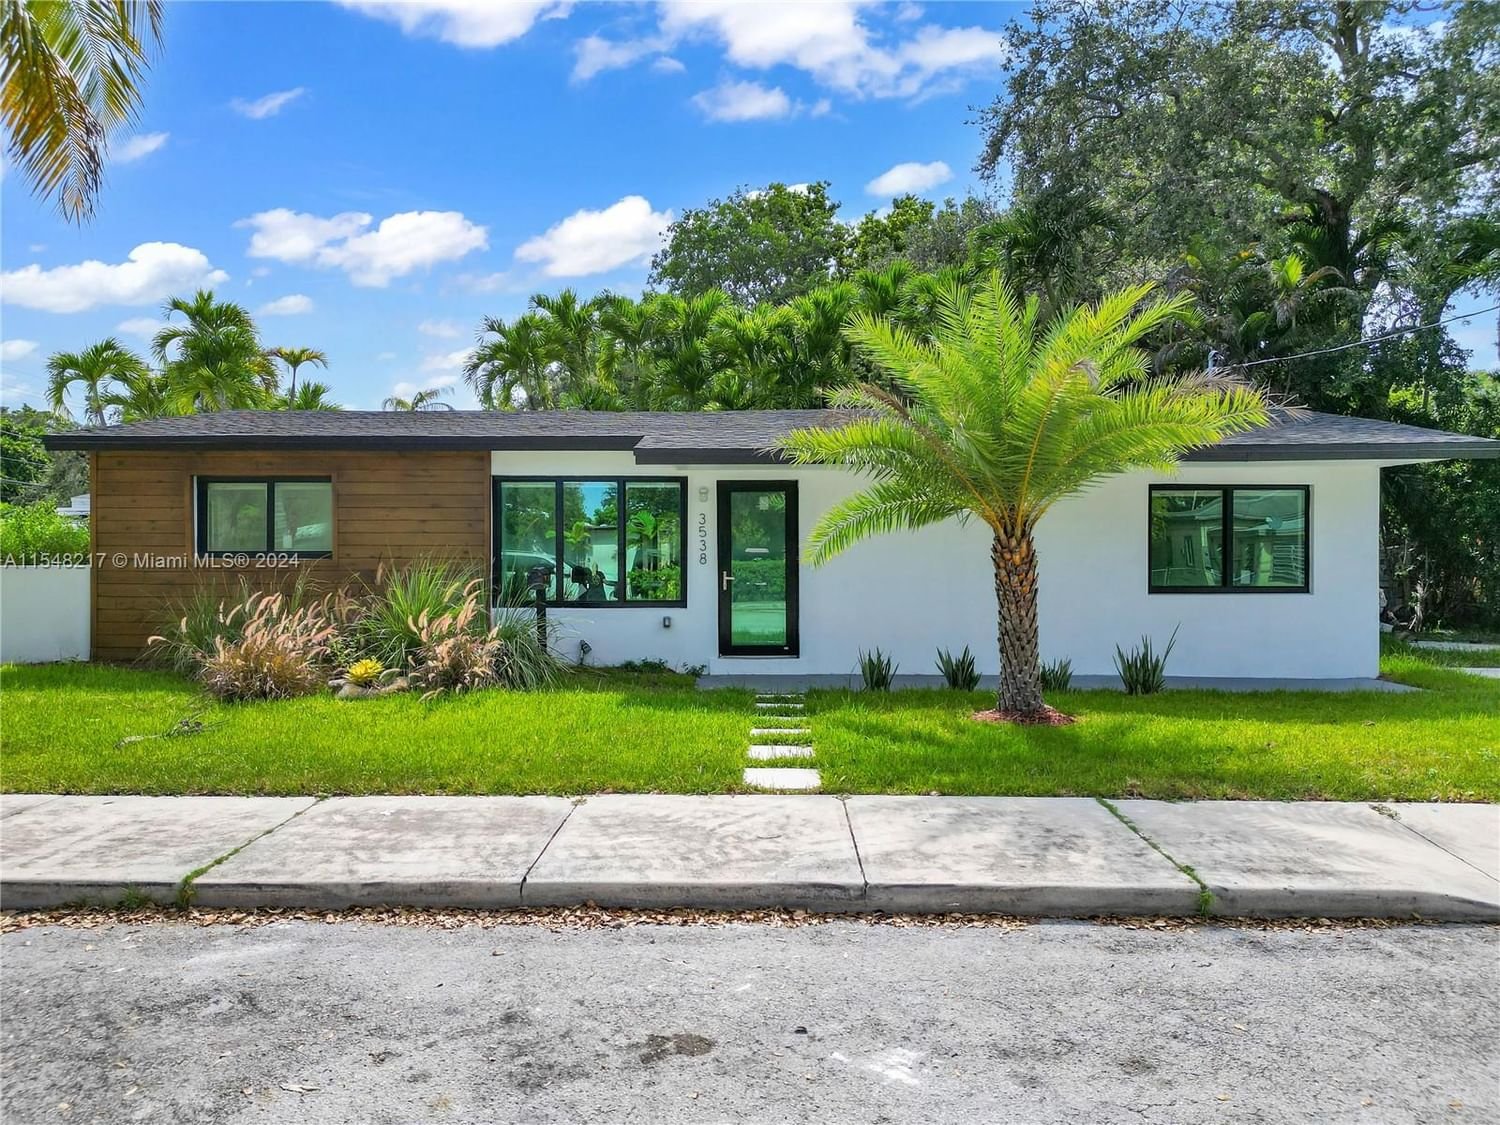 Real estate property located at 3538 Hibiscus St, Miami-Dade County, FROW HOMESTEAD, Miami, FL